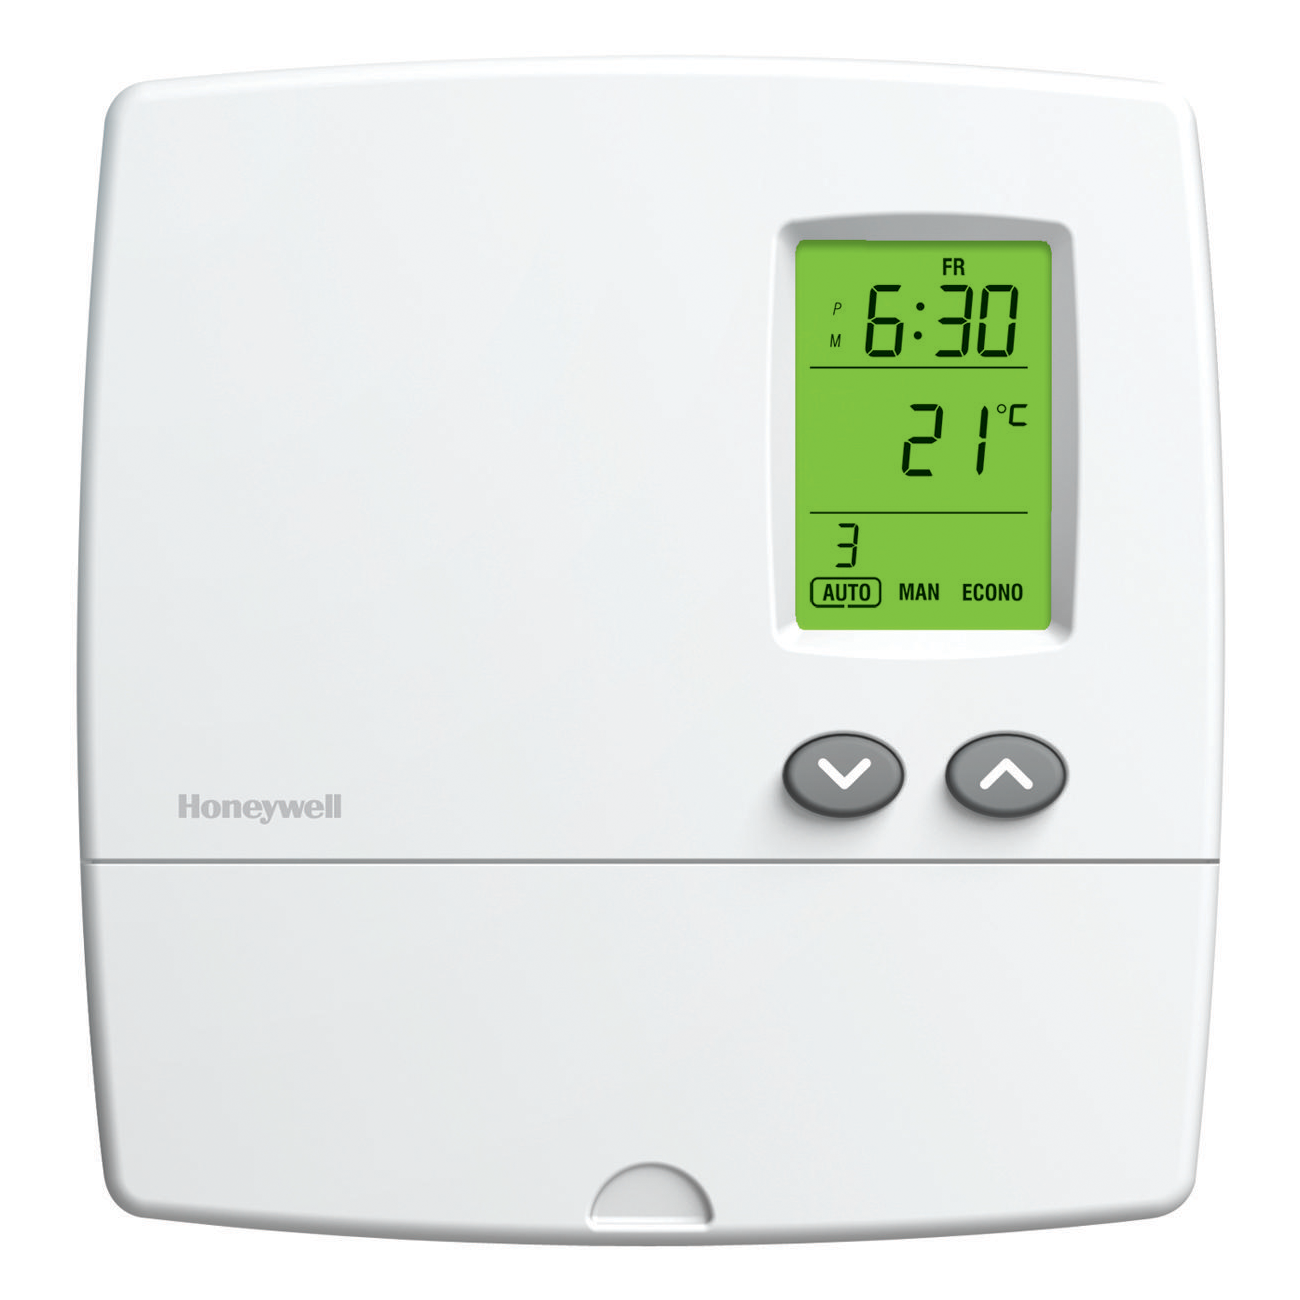 THERMOSTAT PROGRAMMABLE DIGITAL DISPLAY 1750-3000W WHITE